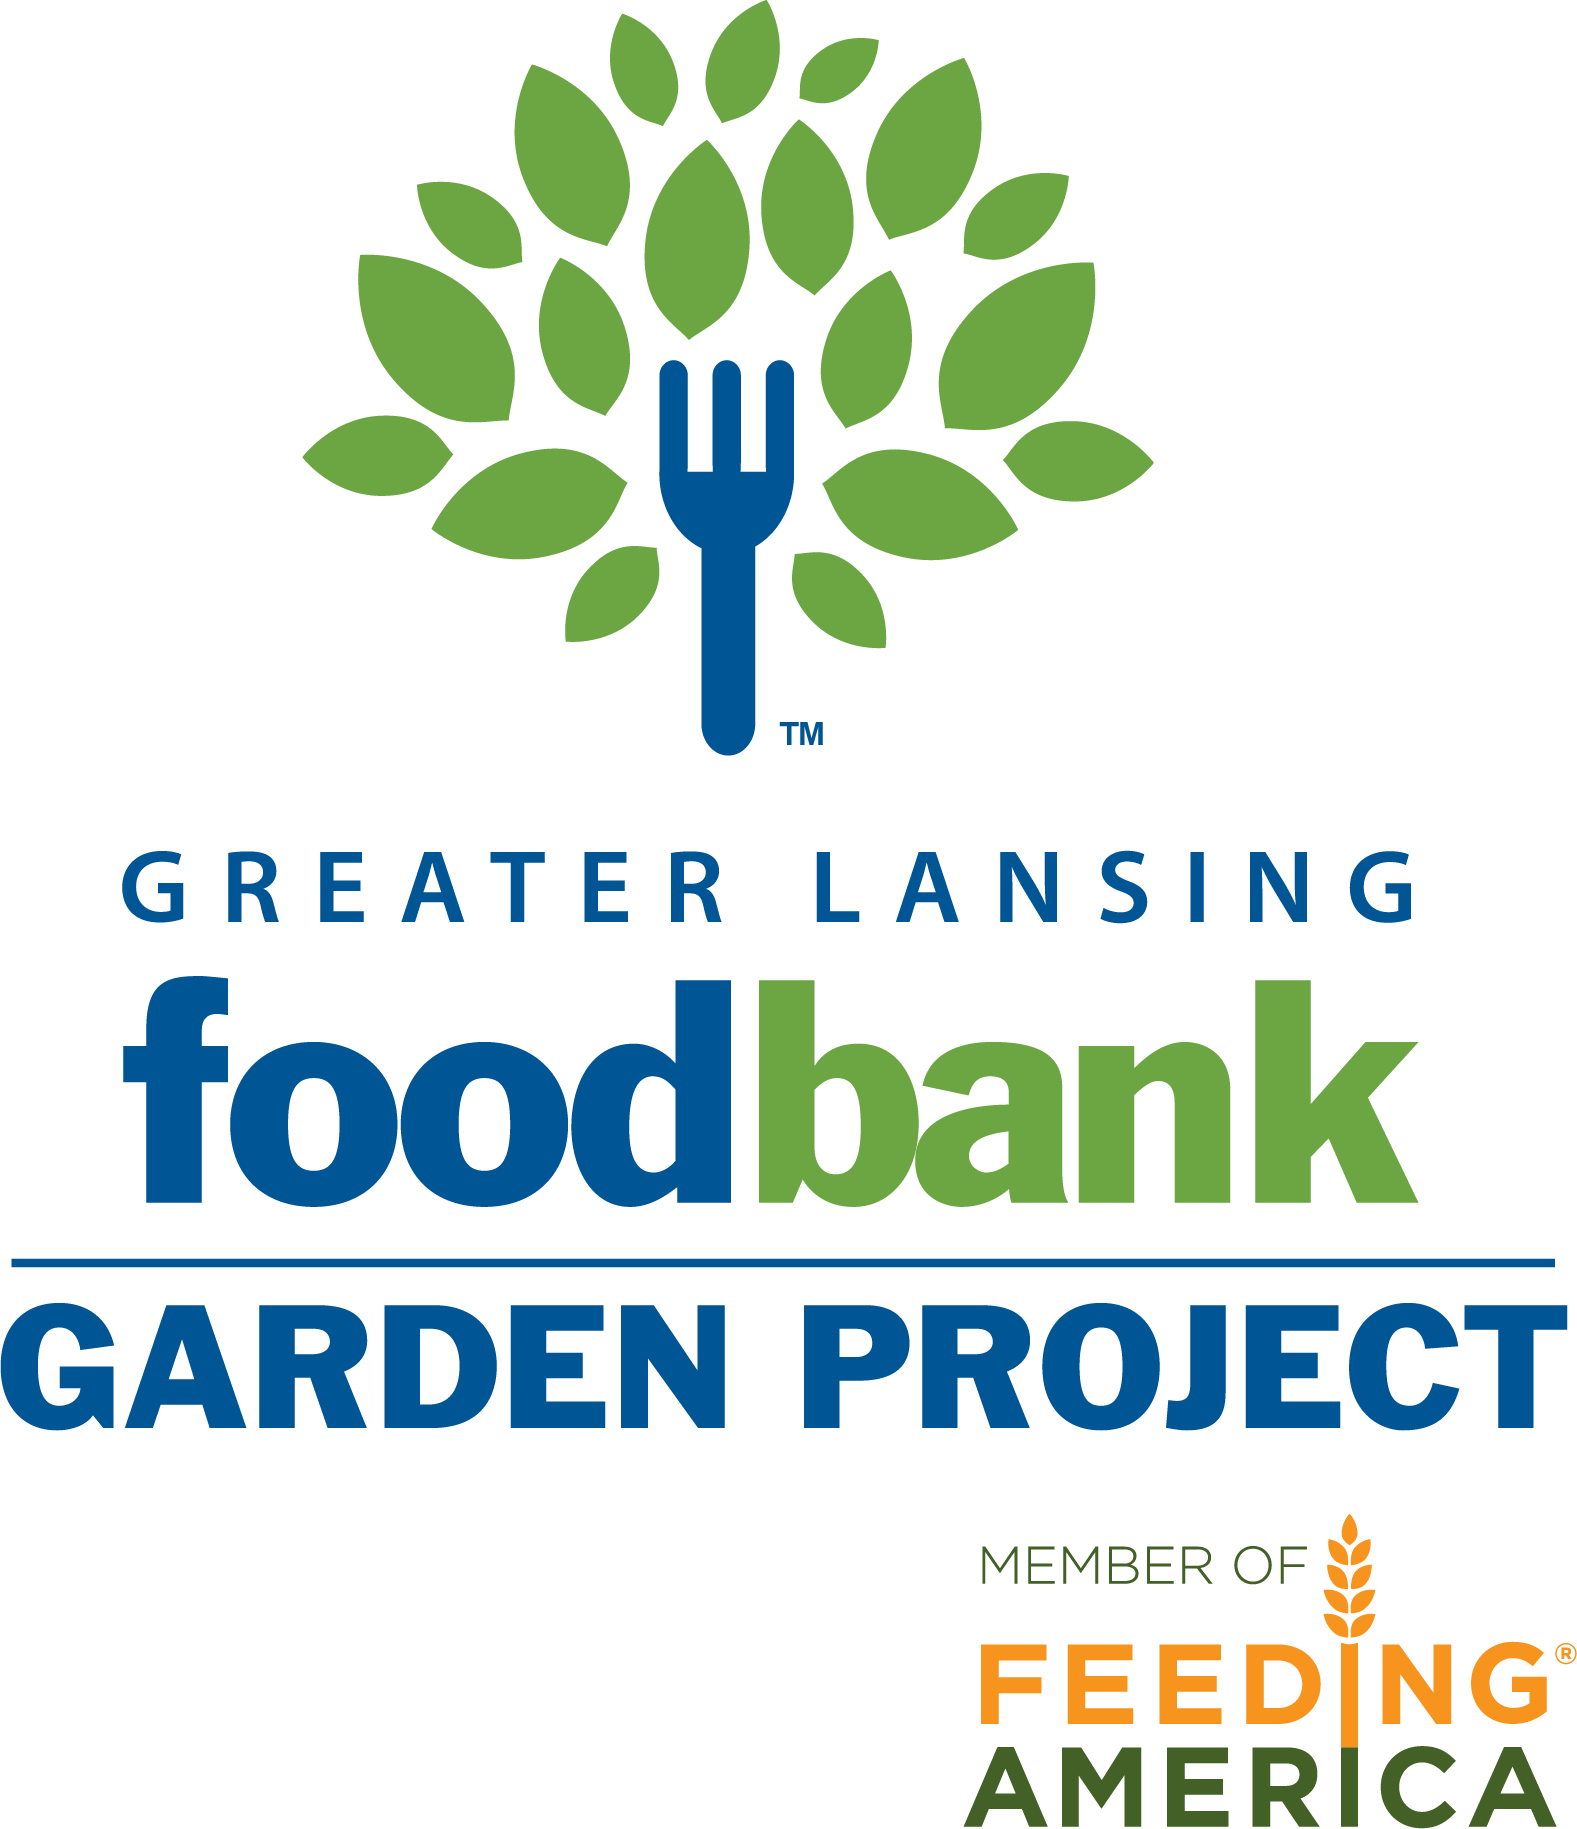 Image of the Greater Lansing Foodbank Garden Project Logo